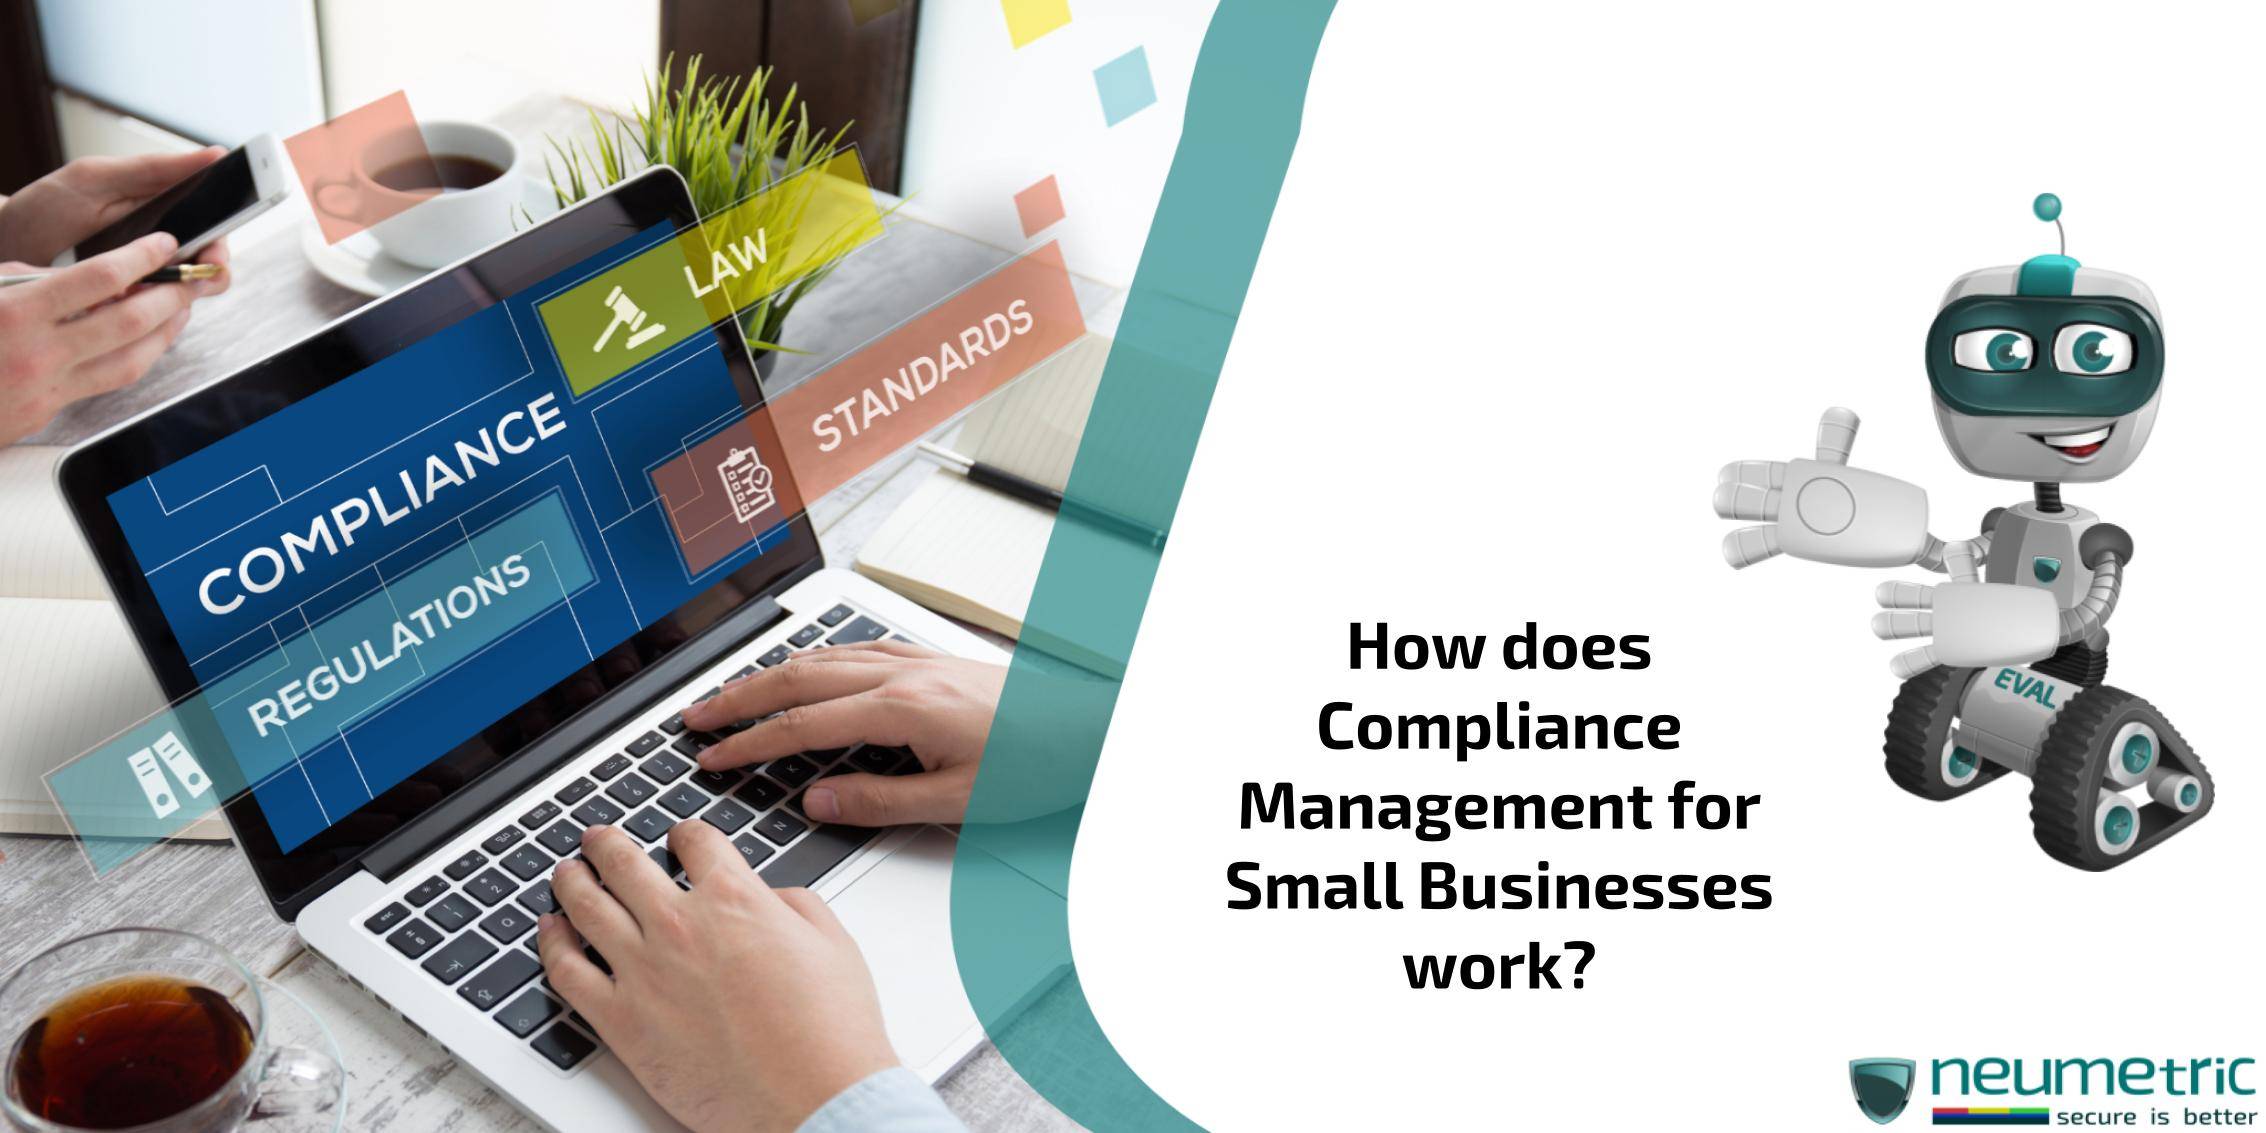 Compliance management for small businesses